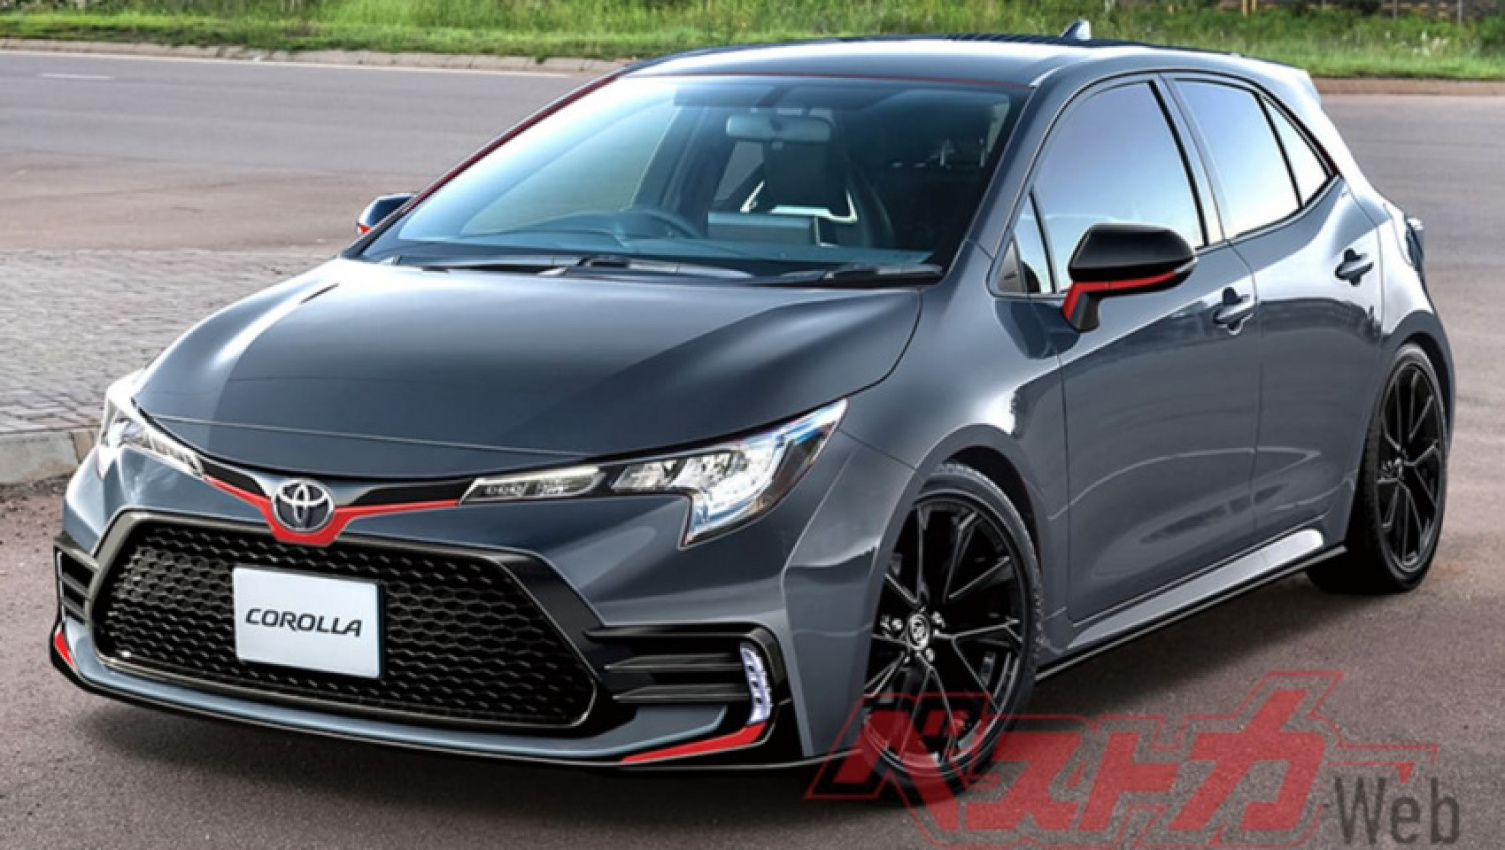 autos, cars, hyundai, toyota, hatchback, hot hatches, industry news, showroom news, toyota corolla, toyota corolla 2022, toyota hatchback range, toyota news, can toyota go ahead and just reveal the gr corolla already? hyundai i30 n and vw golf gti hot hatch rival teased again!